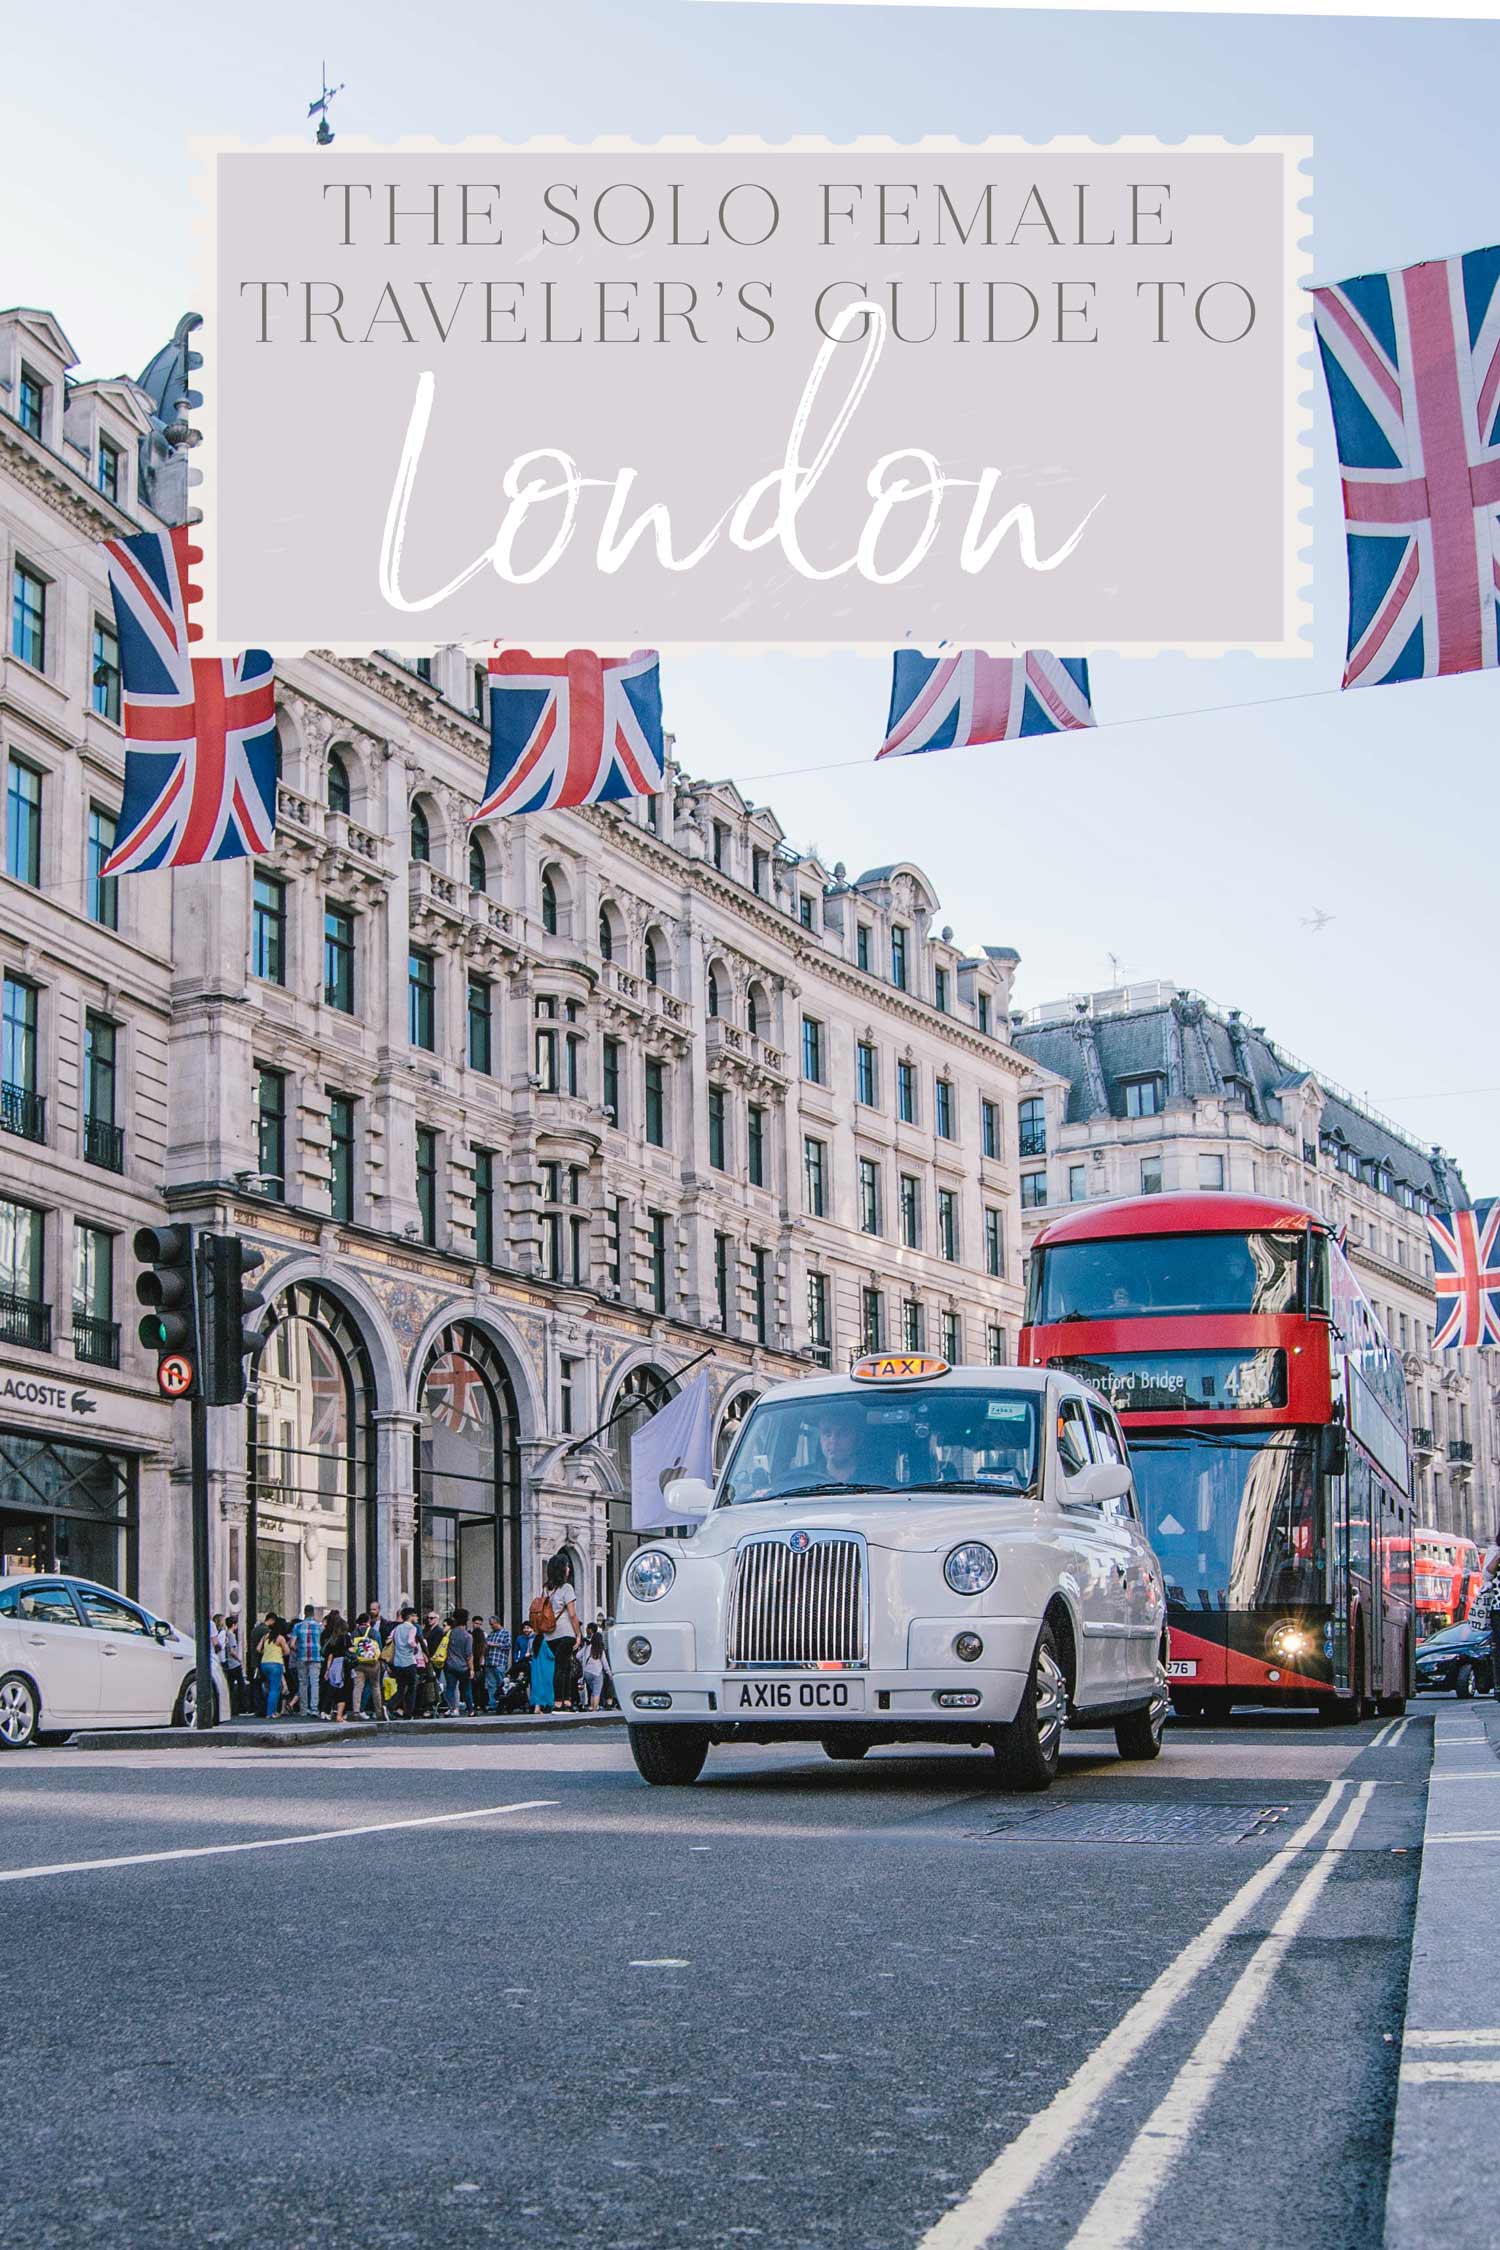 The Solo Female Traveler's Guide to London